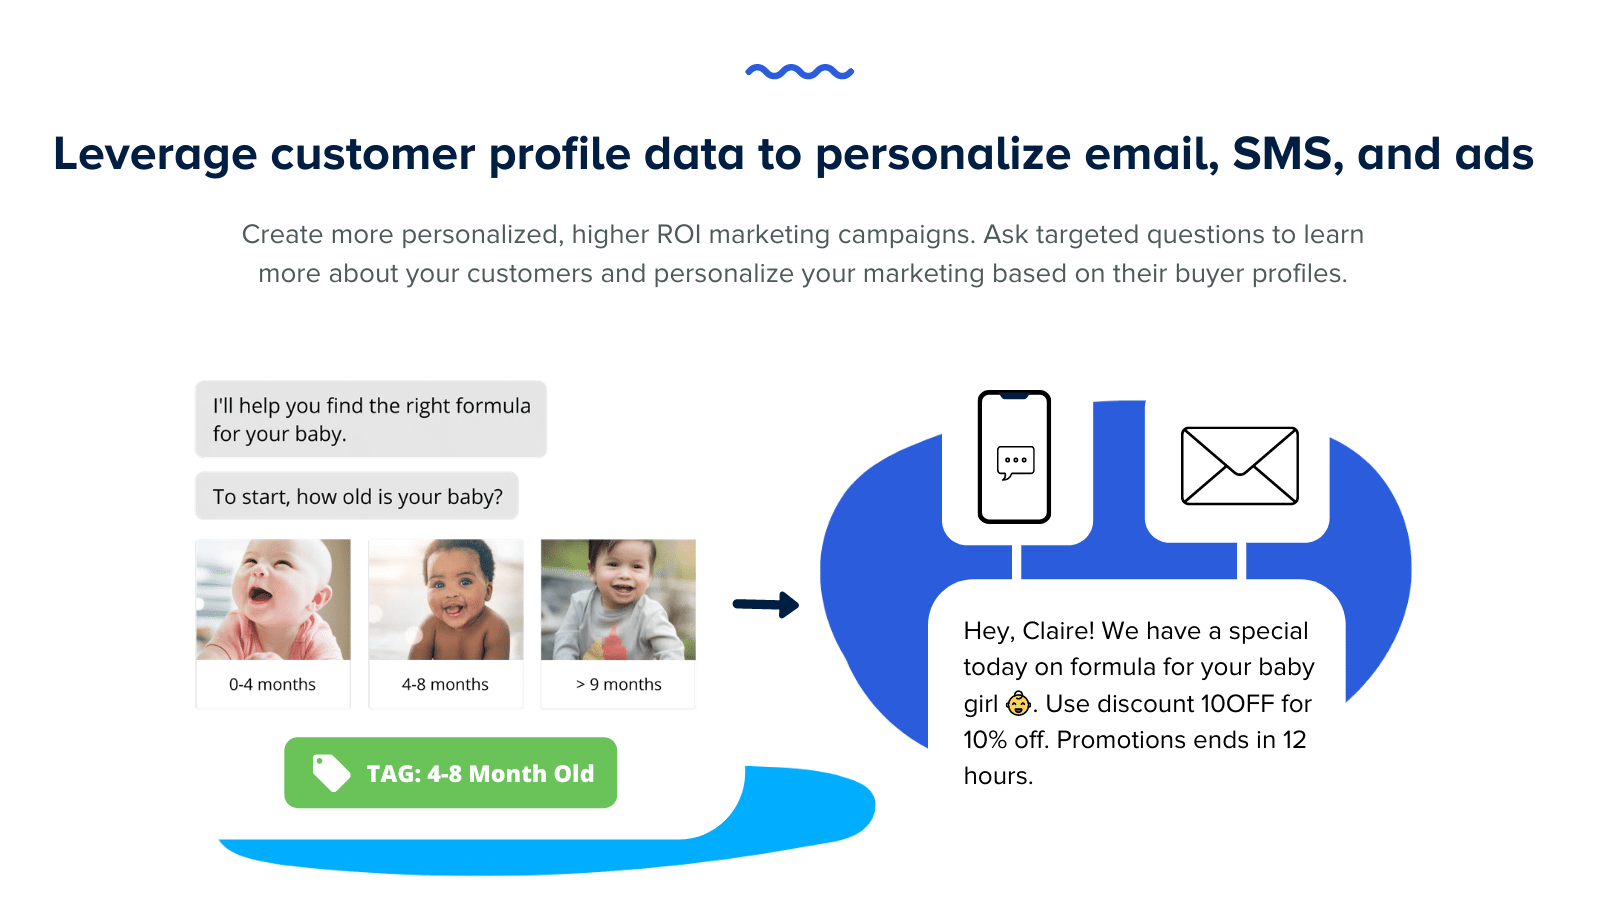 Leverage customer profile data to personalize email, SMS & ads